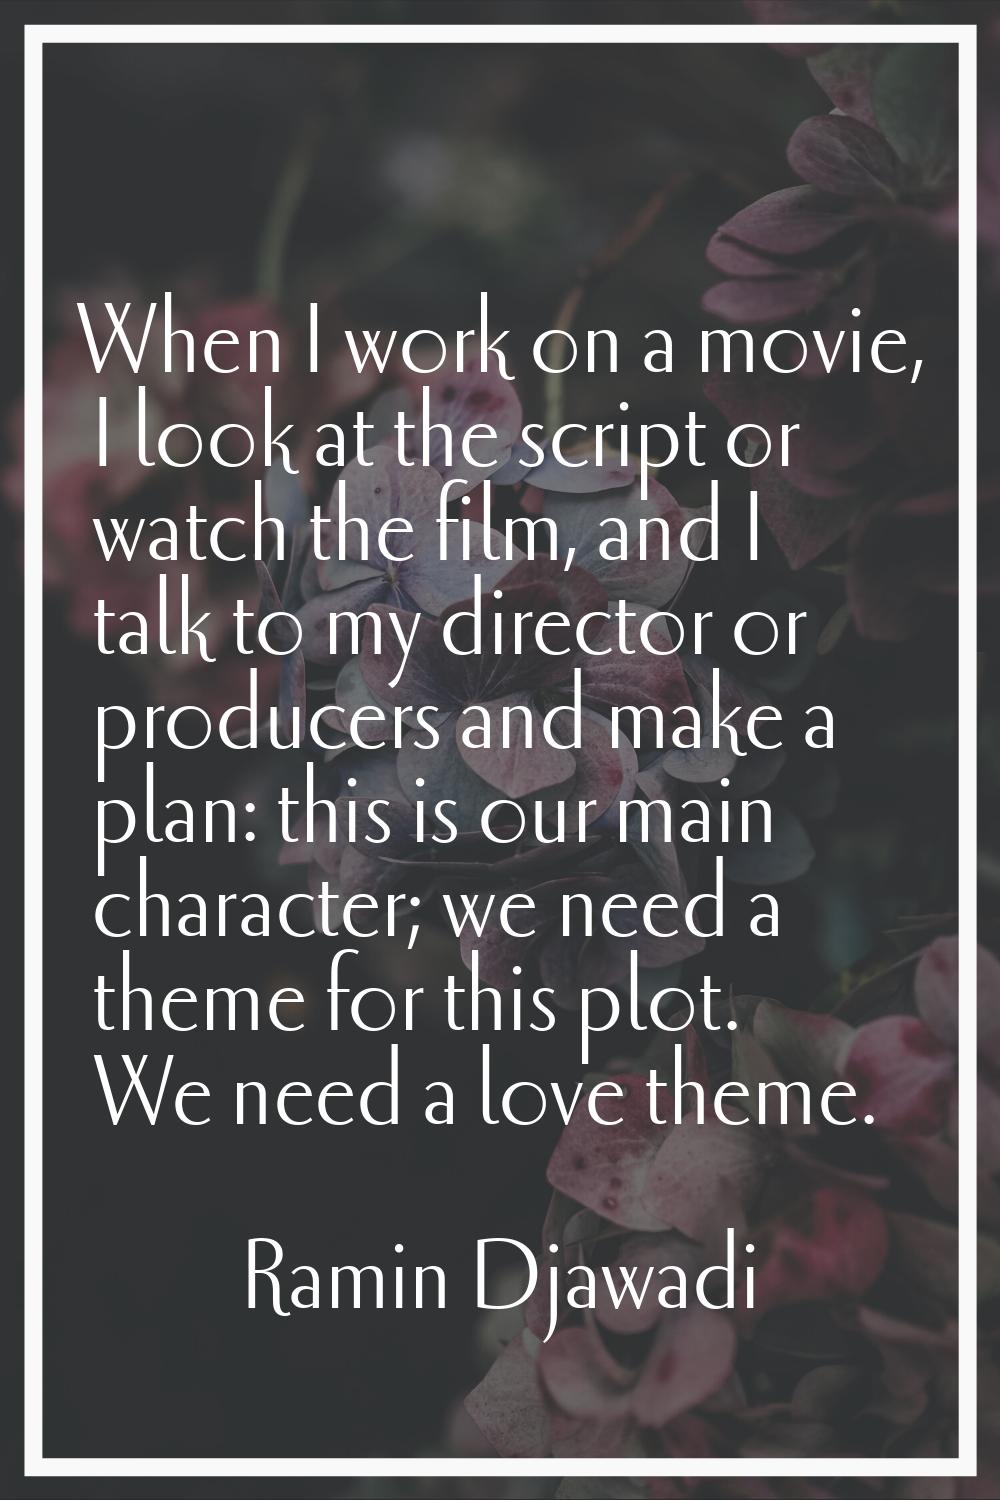 When I work on a movie, I look at the script or watch the film, and I talk to my director or produc